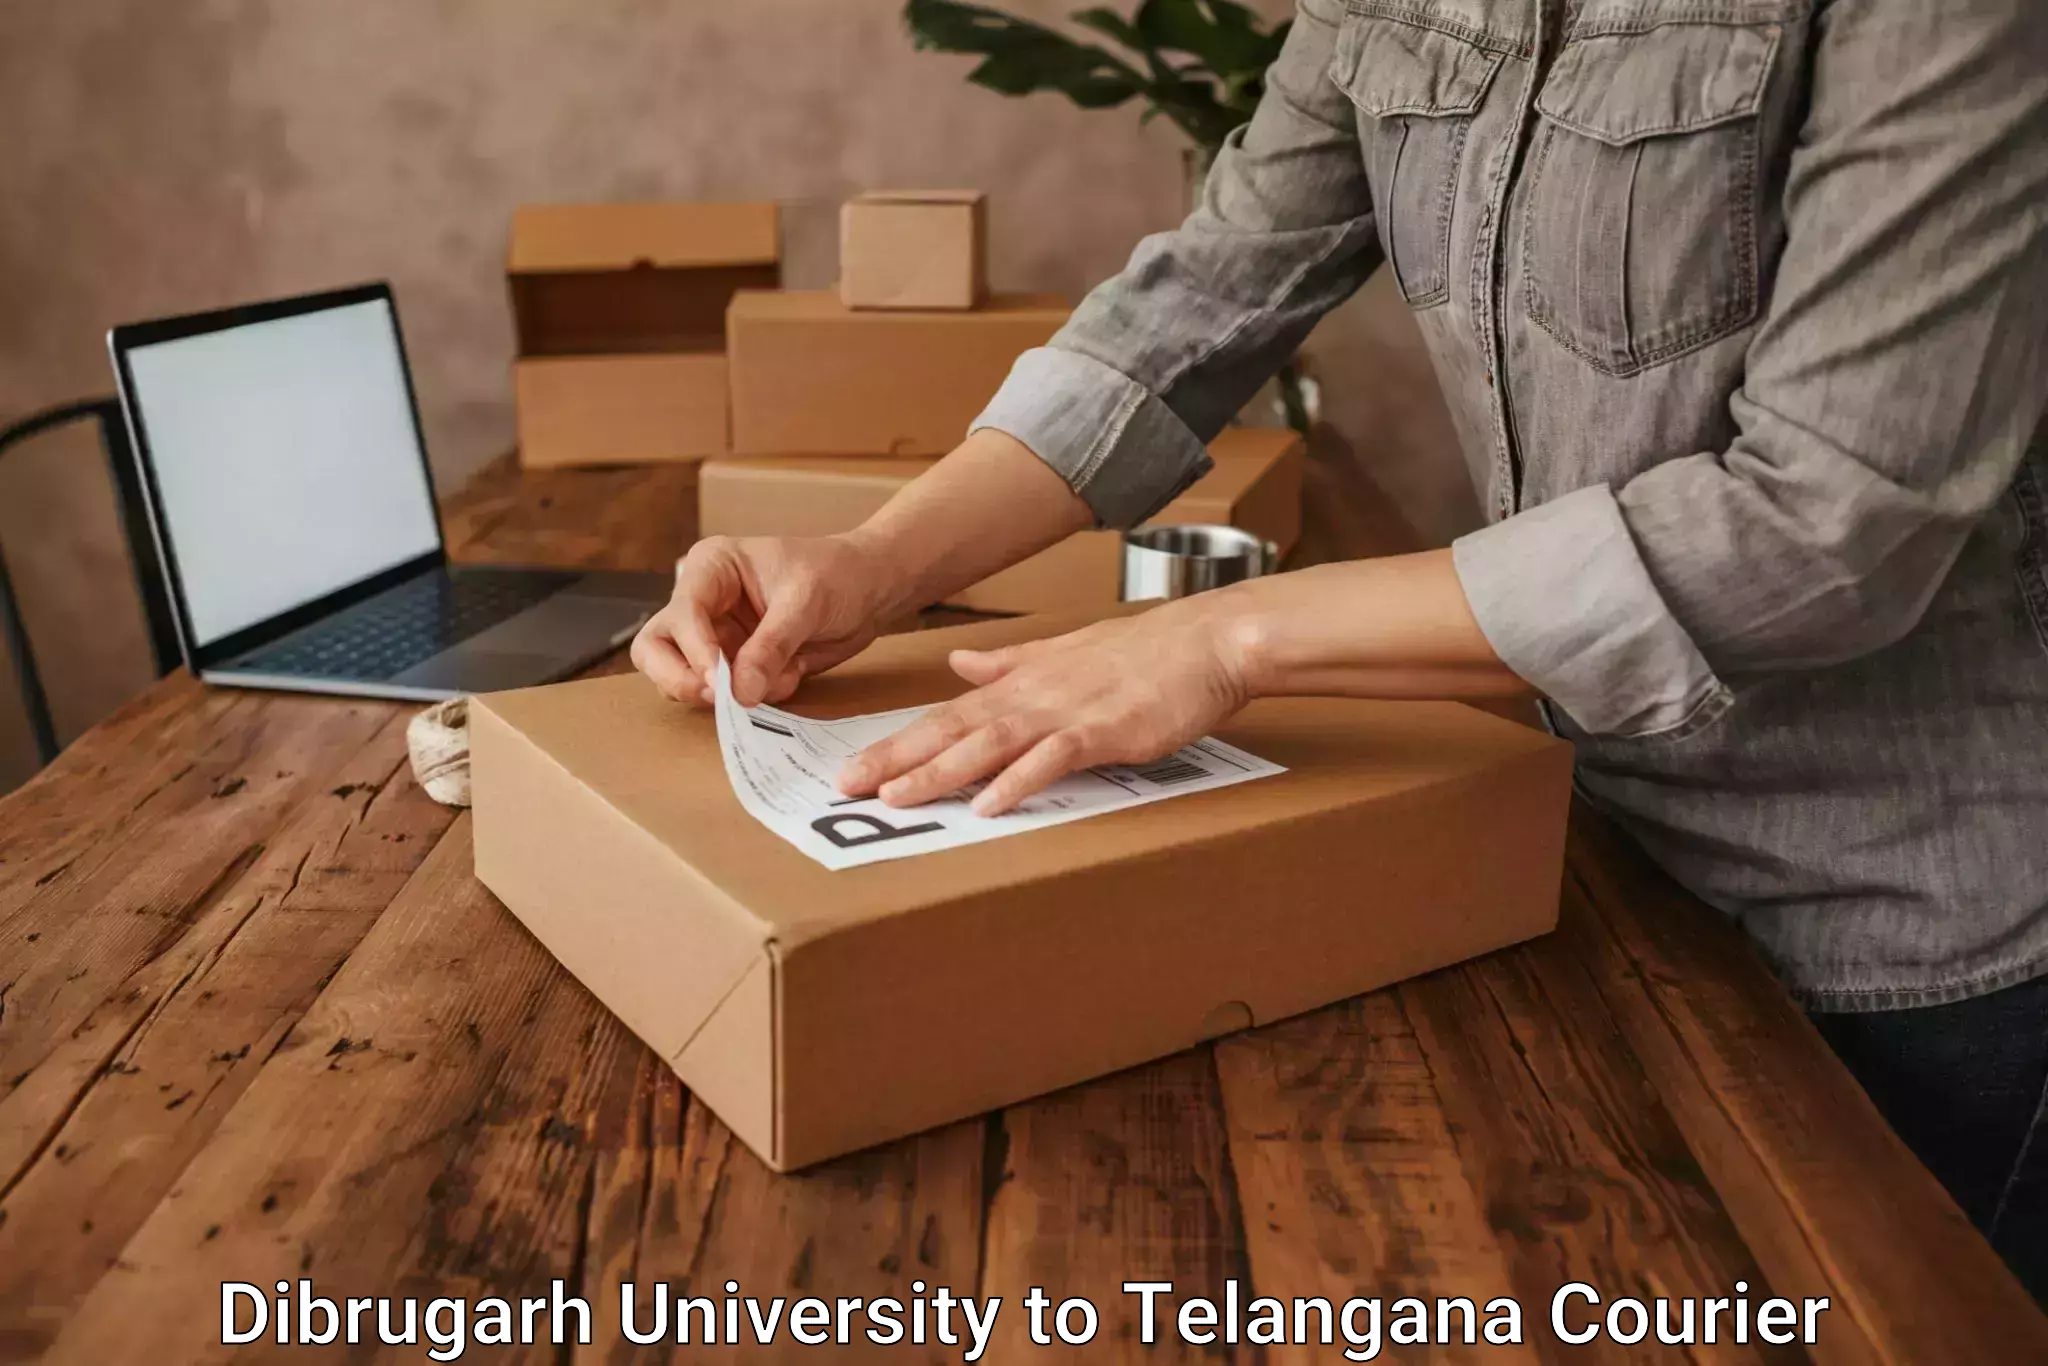 Reliable delivery network Dibrugarh University to Allapalli